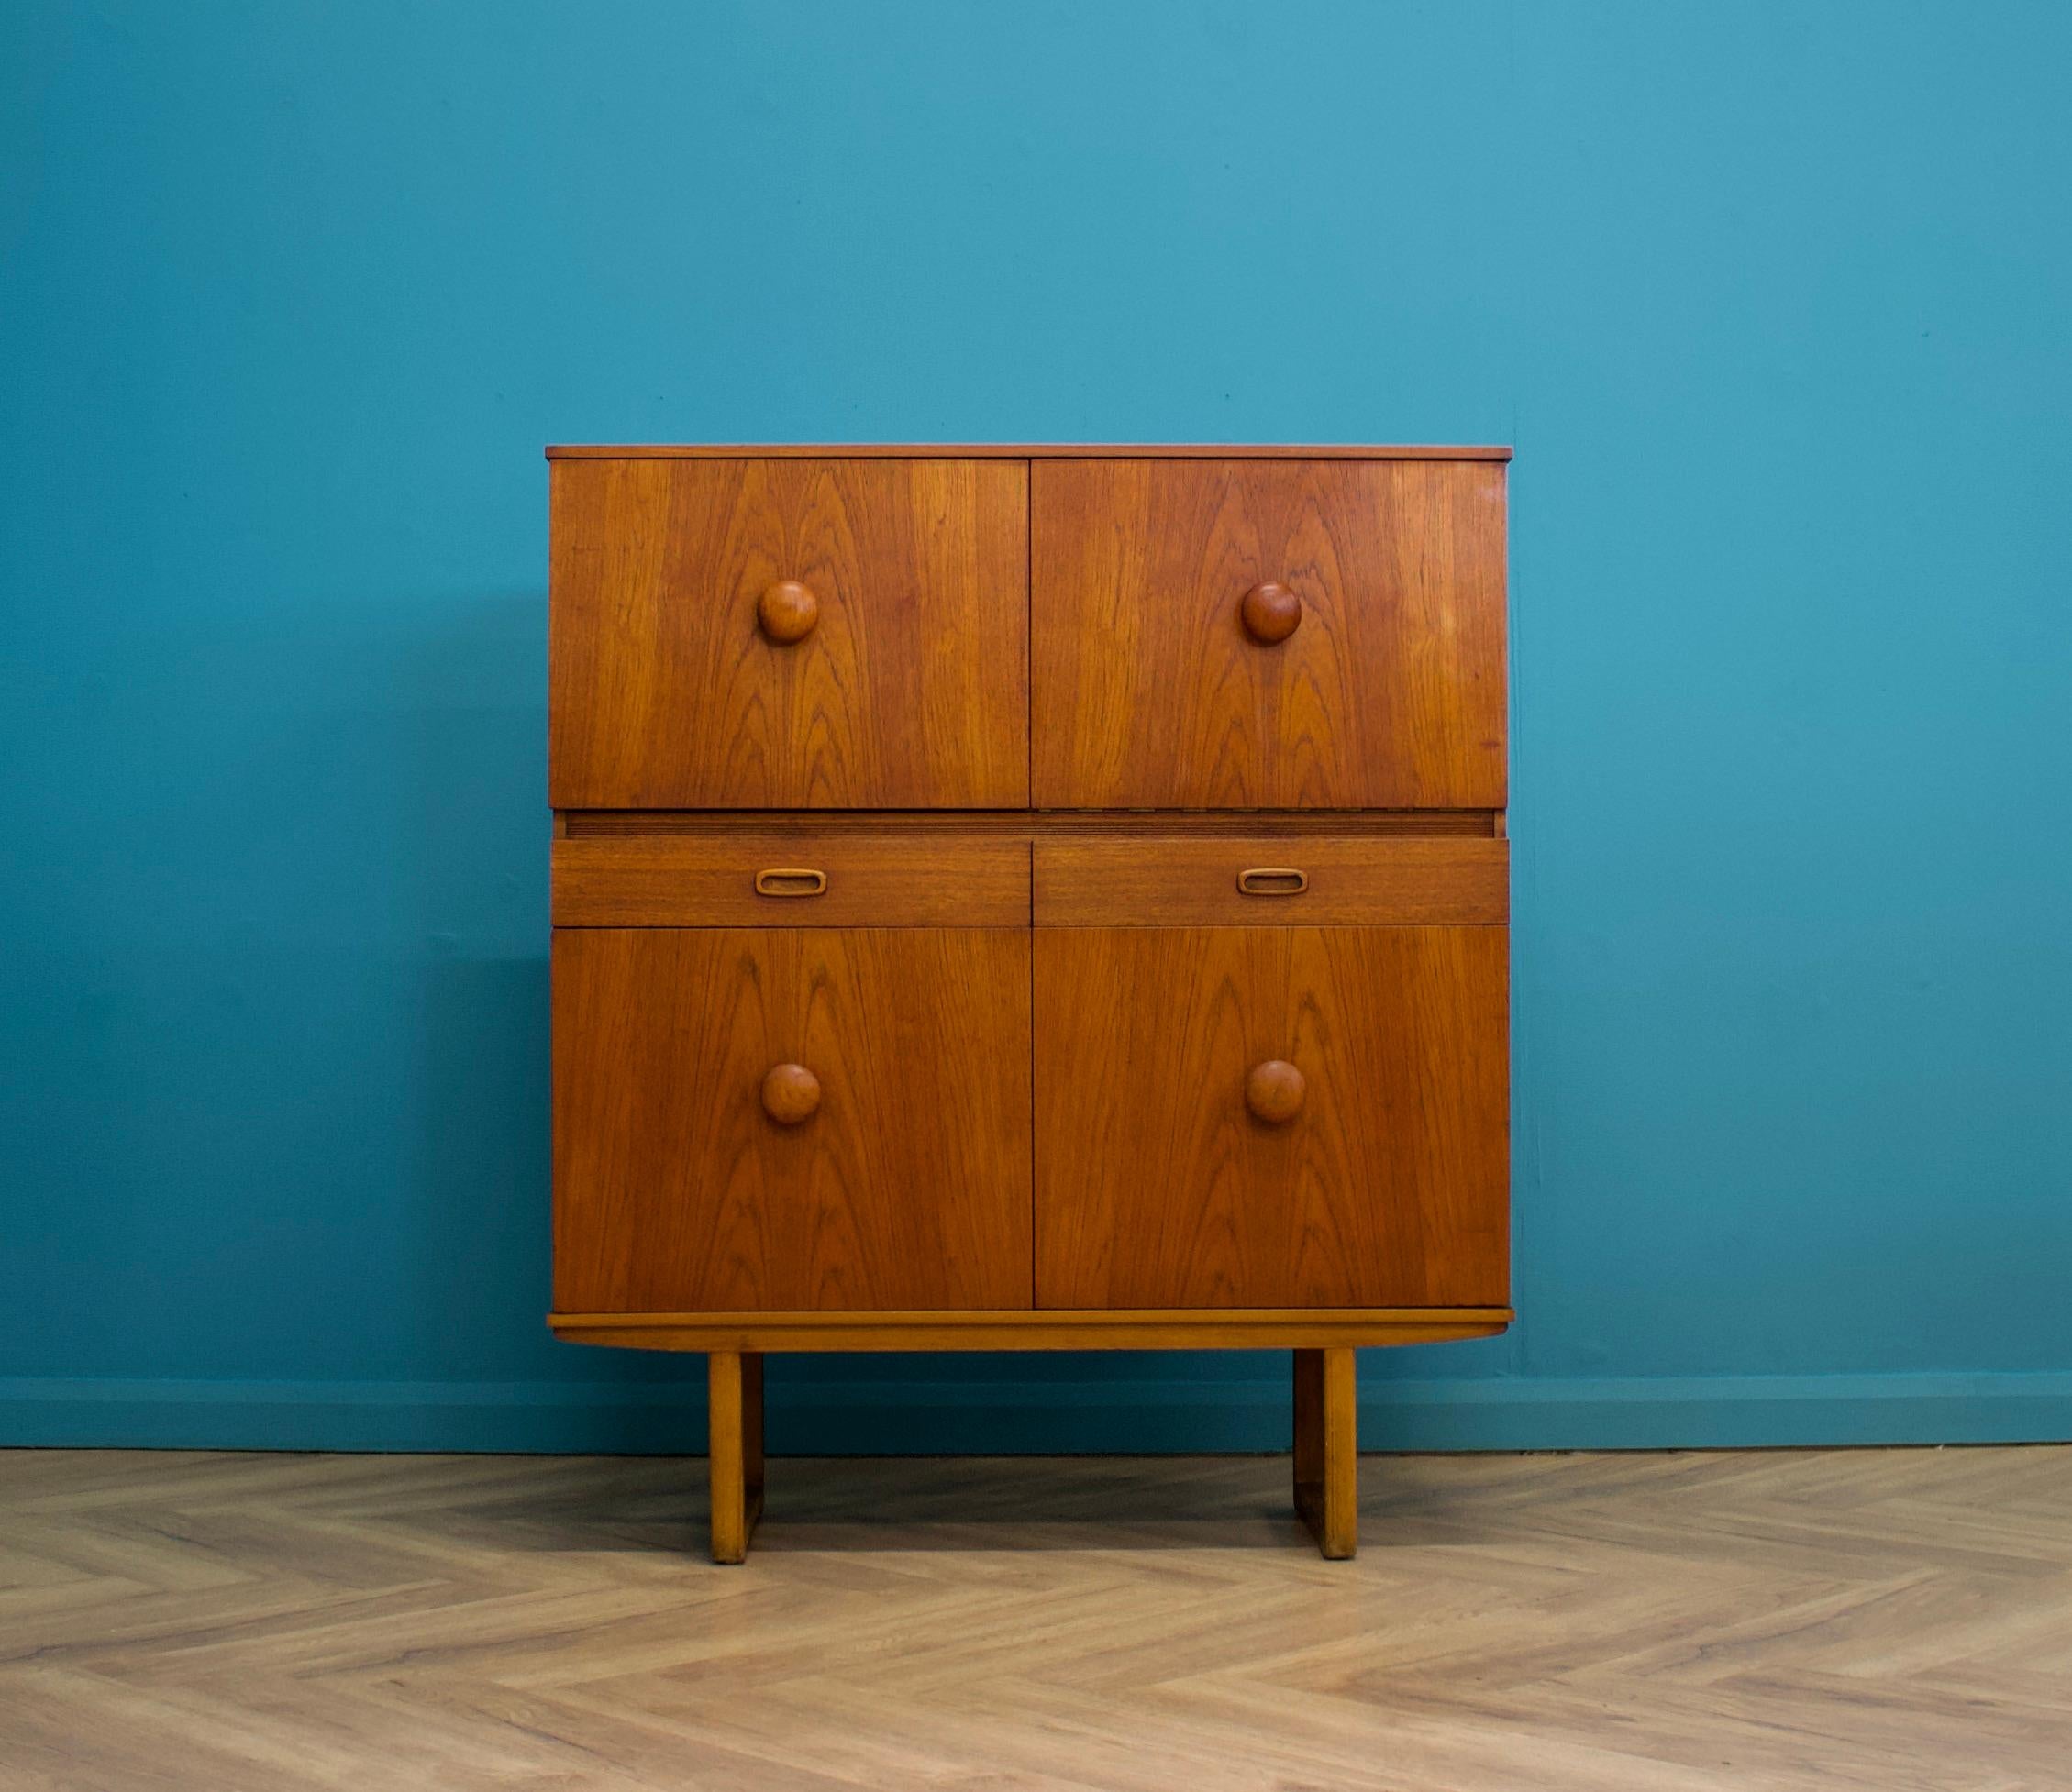 A teak drinks cabinet, circa 1960s

Featuring two drawers, two cupboards and a pull down drinks cupboard

The original light is present, but is not wired in